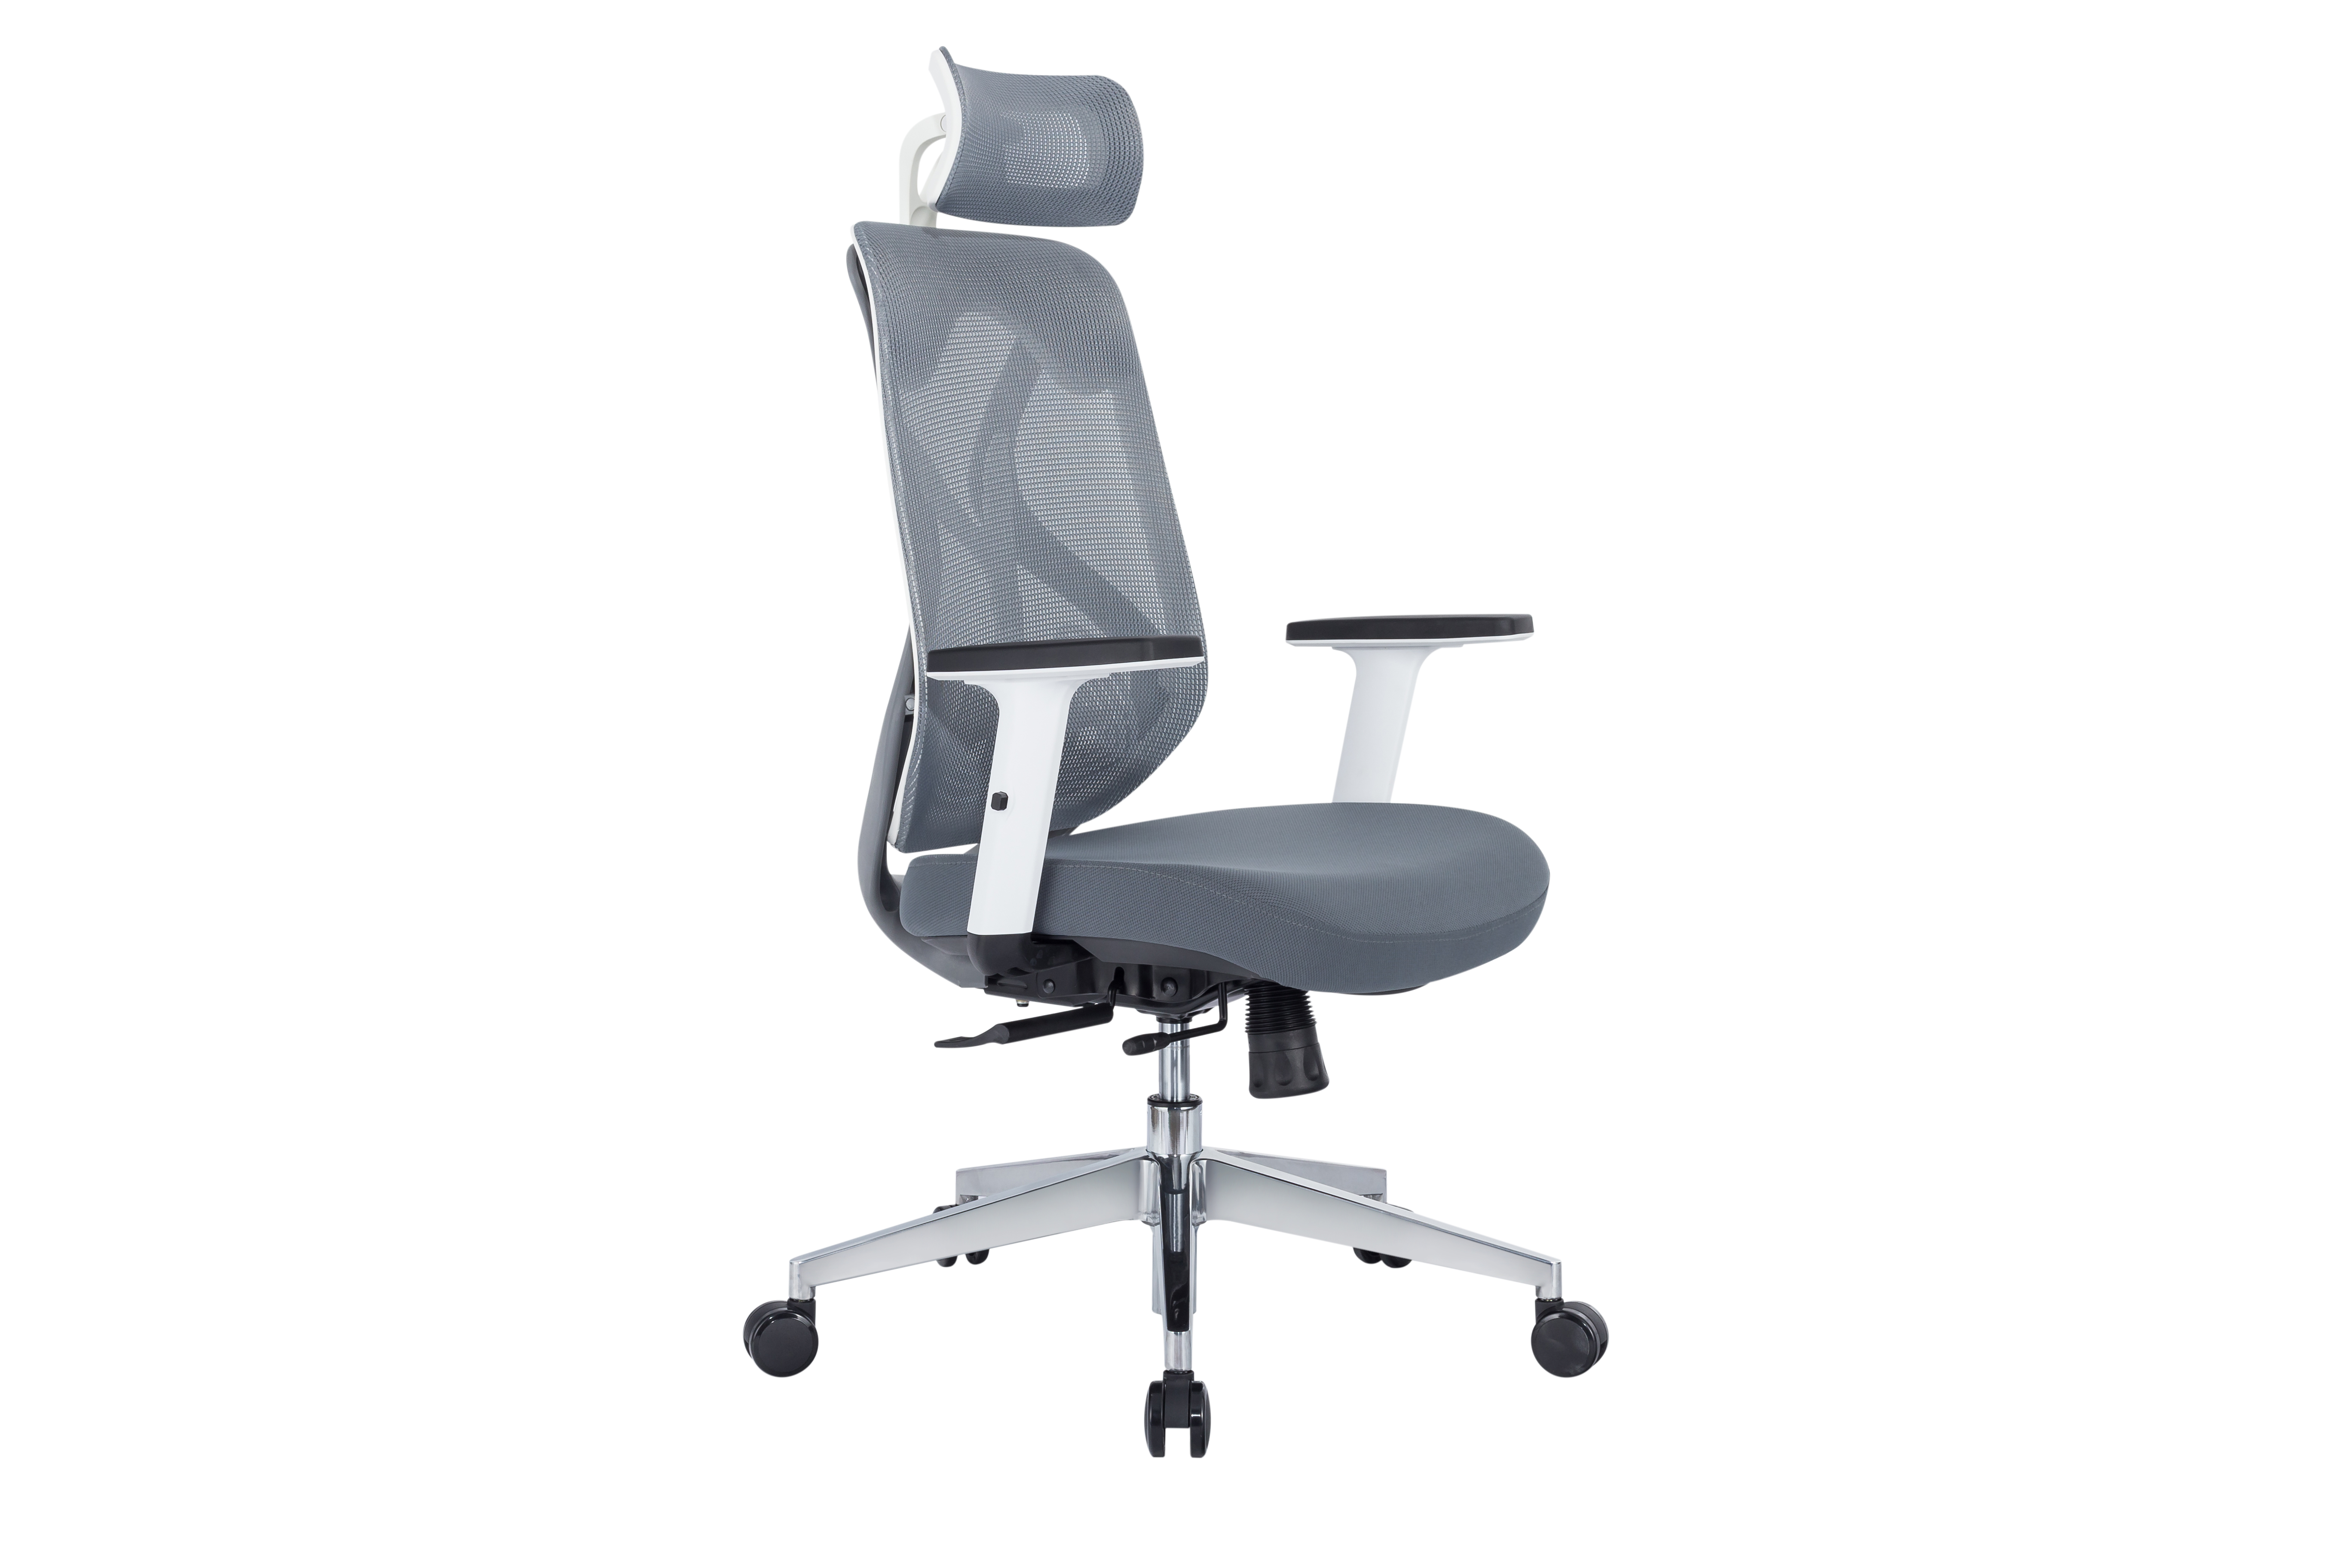 Multi-function Mesh Back Chair with Fabric Seat